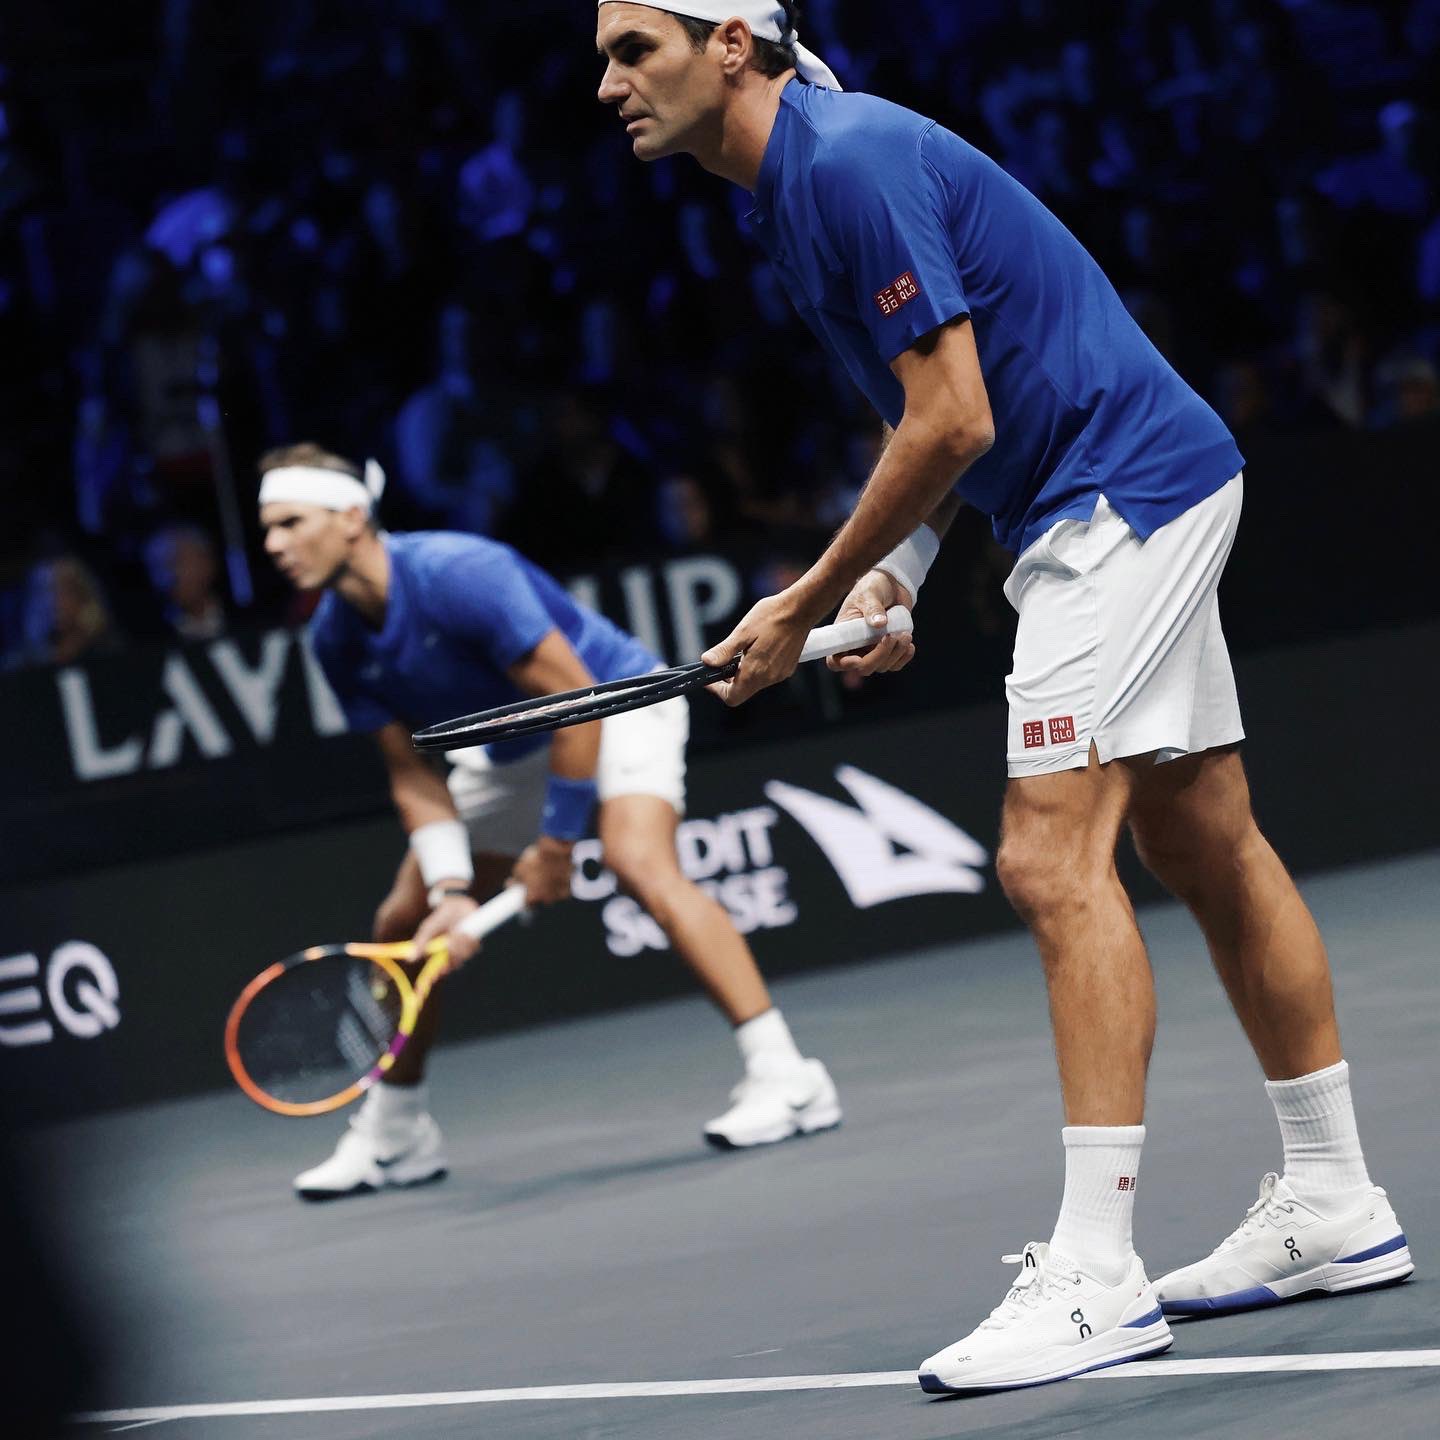 Laver Cup 2022 - Day 1: Roger's Last Match (Sep 23)  - Page 4 FdaqXxXX0AE36Lq?format=jpg&name=large